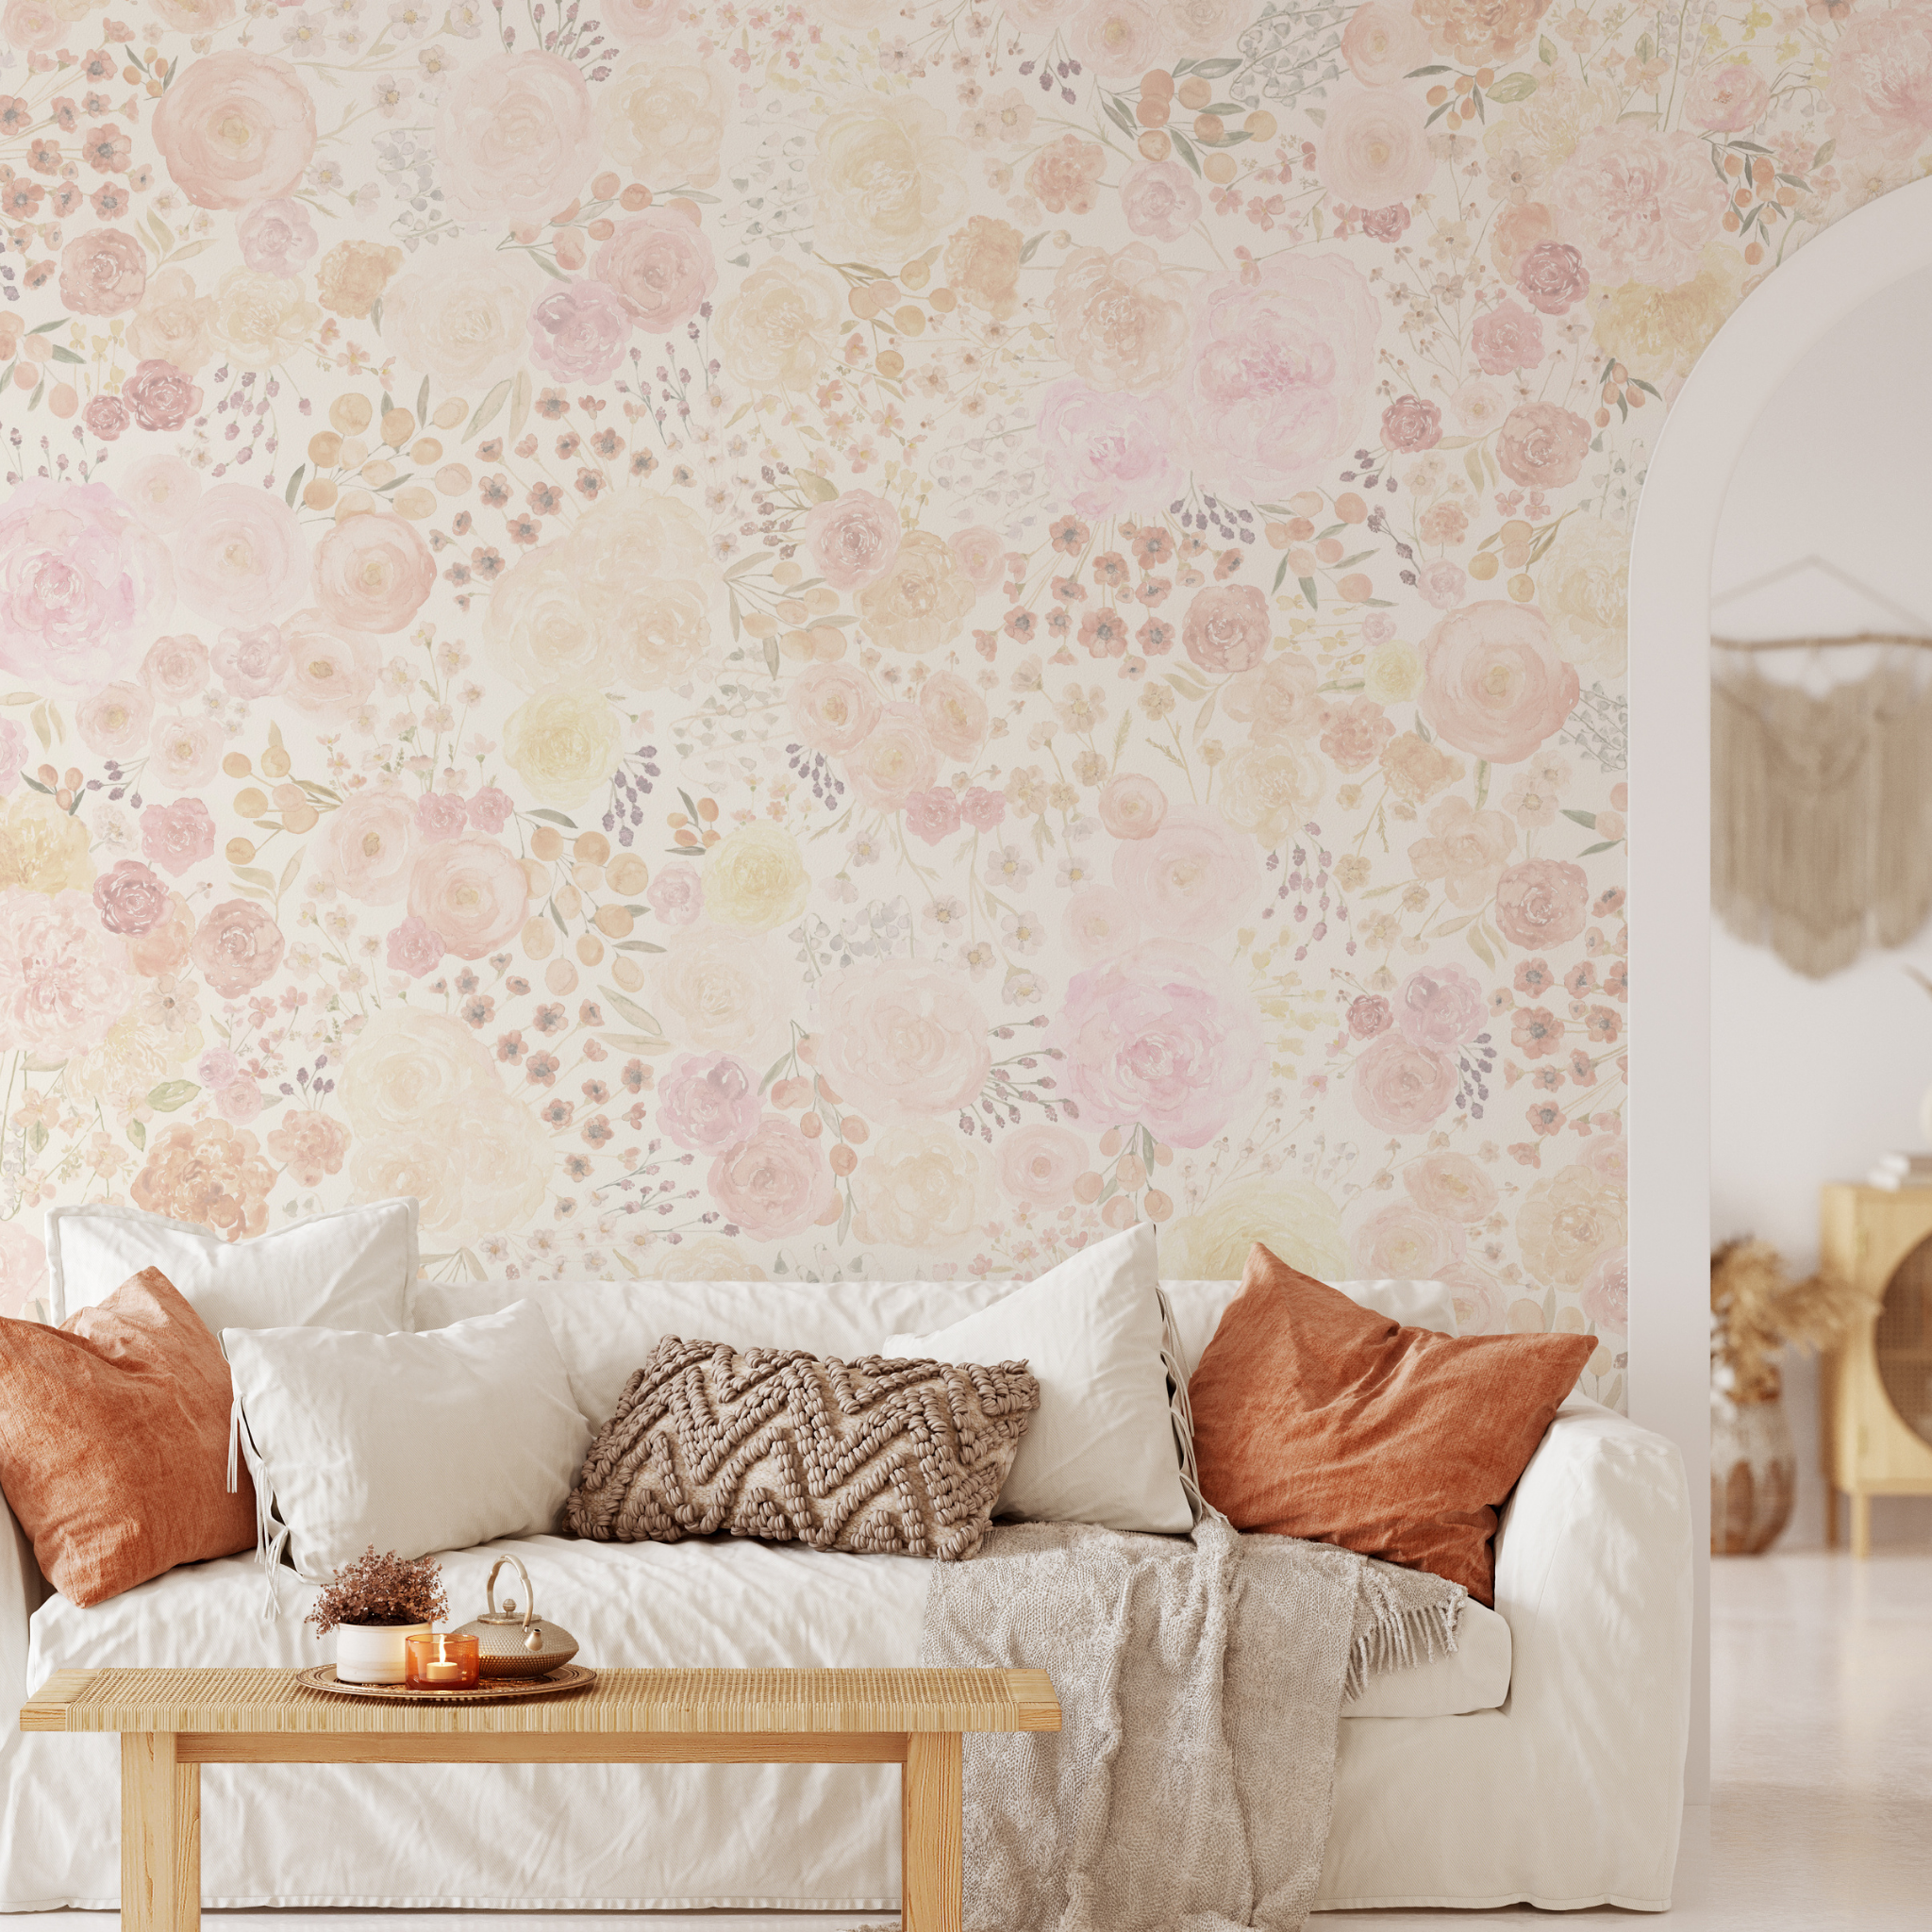 Alt: "Lucy Wallpaper by Wall Blush featuring floral patterns in a cozy living room with a plush white sofa and wooden table."